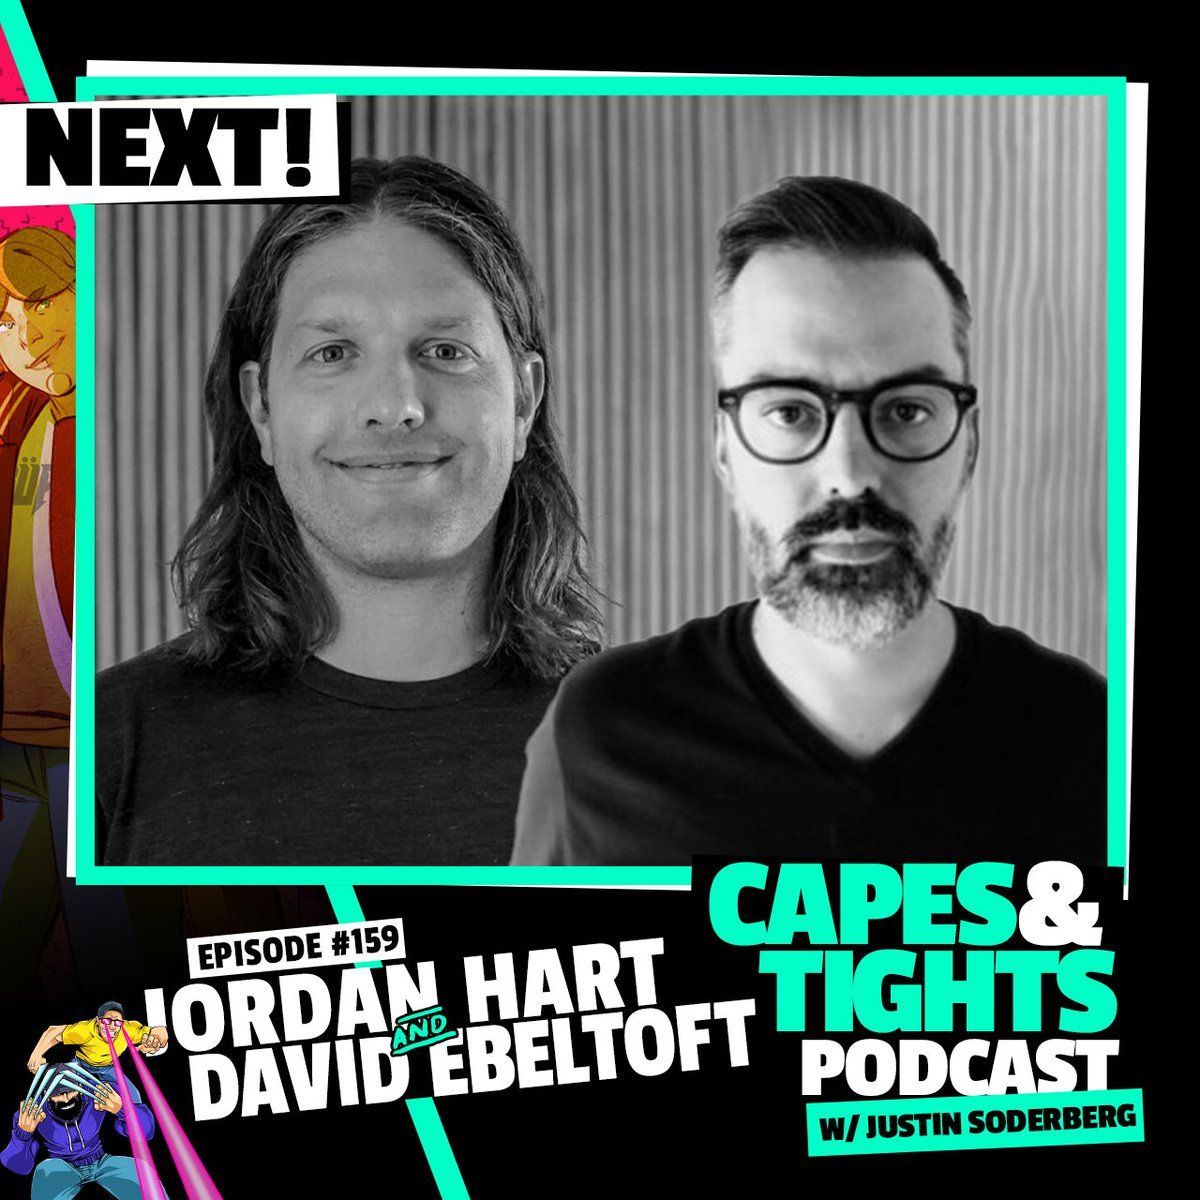 Coming up this week on the Capes and Tights Podcast, comic creators Jordan Hart and David Ebeltoft join the program to discuss their coming book The Cabinet and much more!

Subscribe: capestights.com/links

#thecabinet #comics #comicbooks